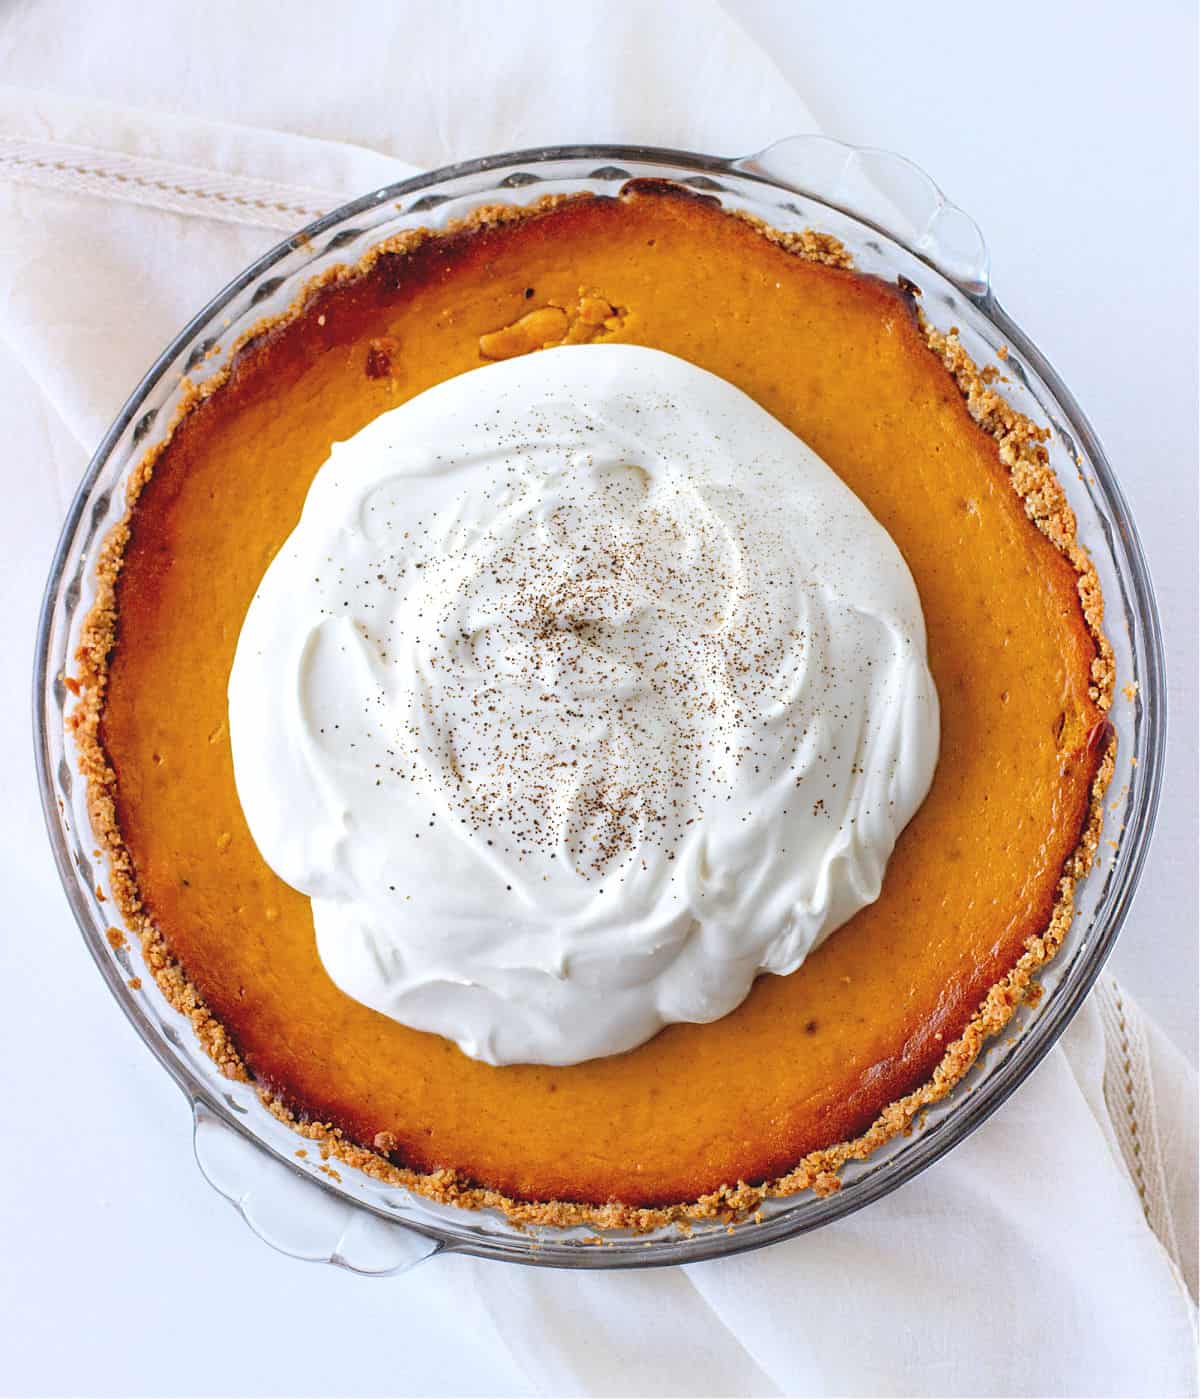 Top view of whole pumpkin pie with cream on top on a glass dish. White cloth and surface